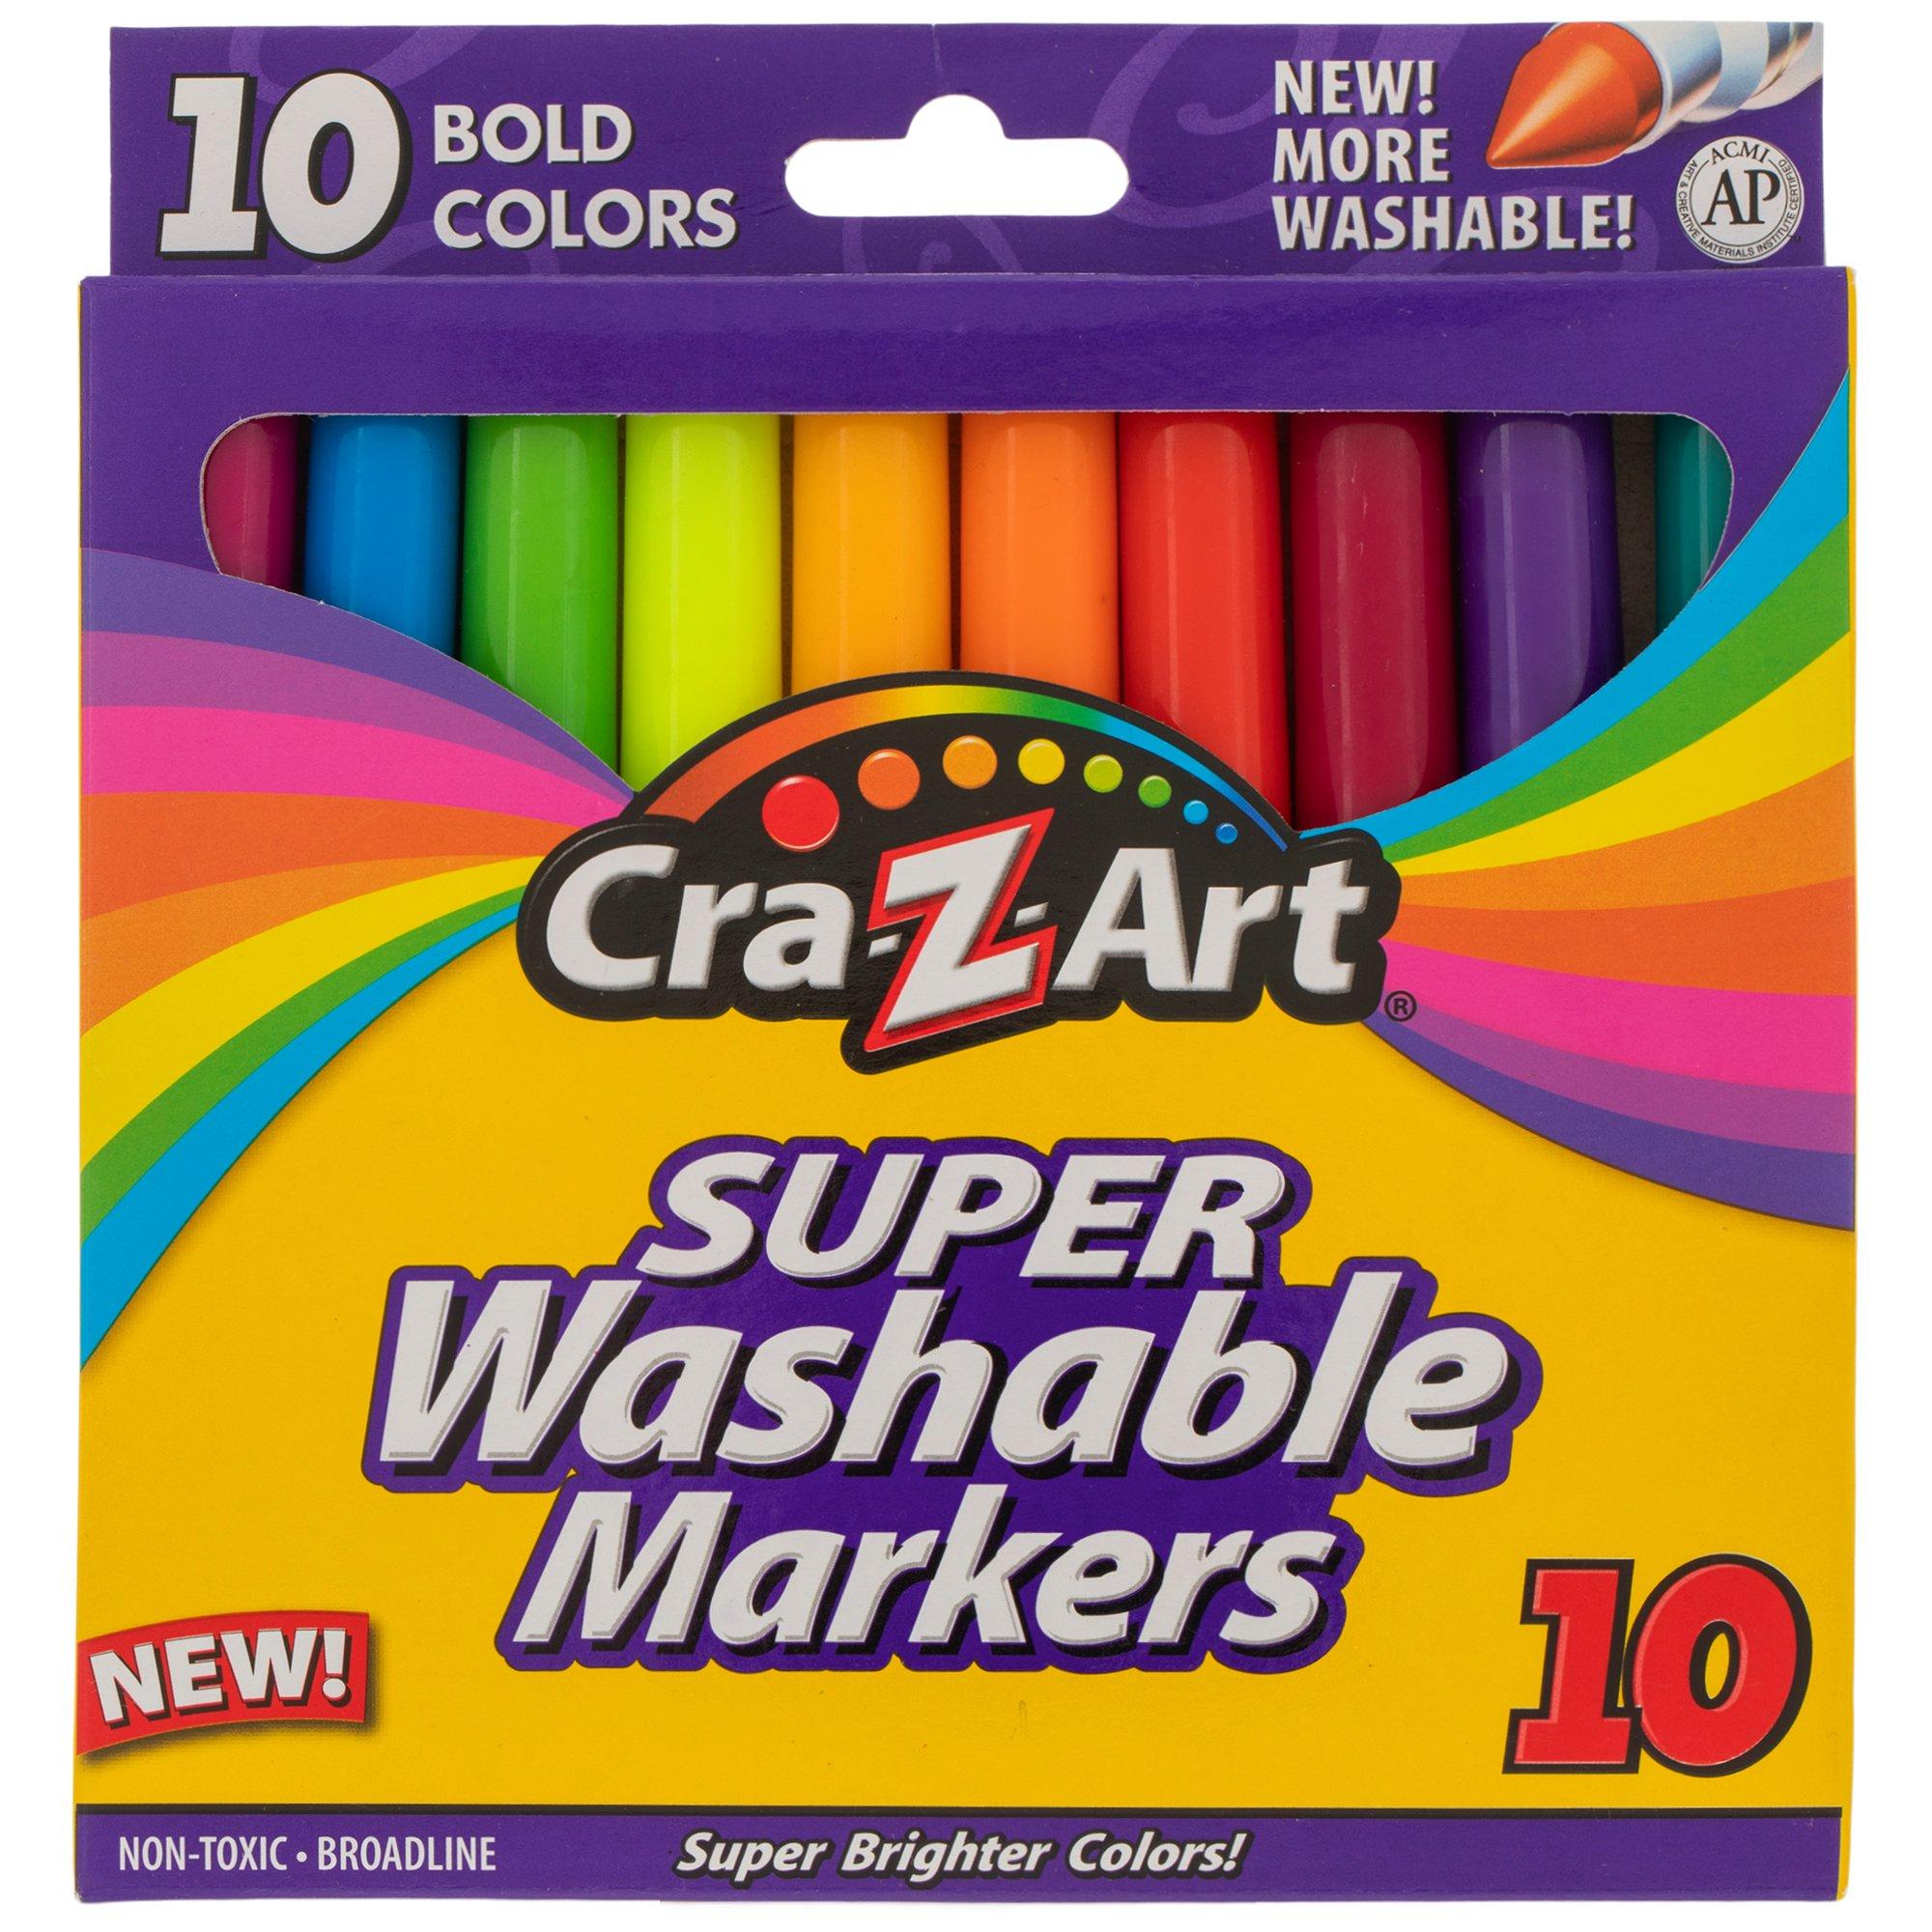 Cra-Z-Art Washable Super Tip Markers, 30 Count